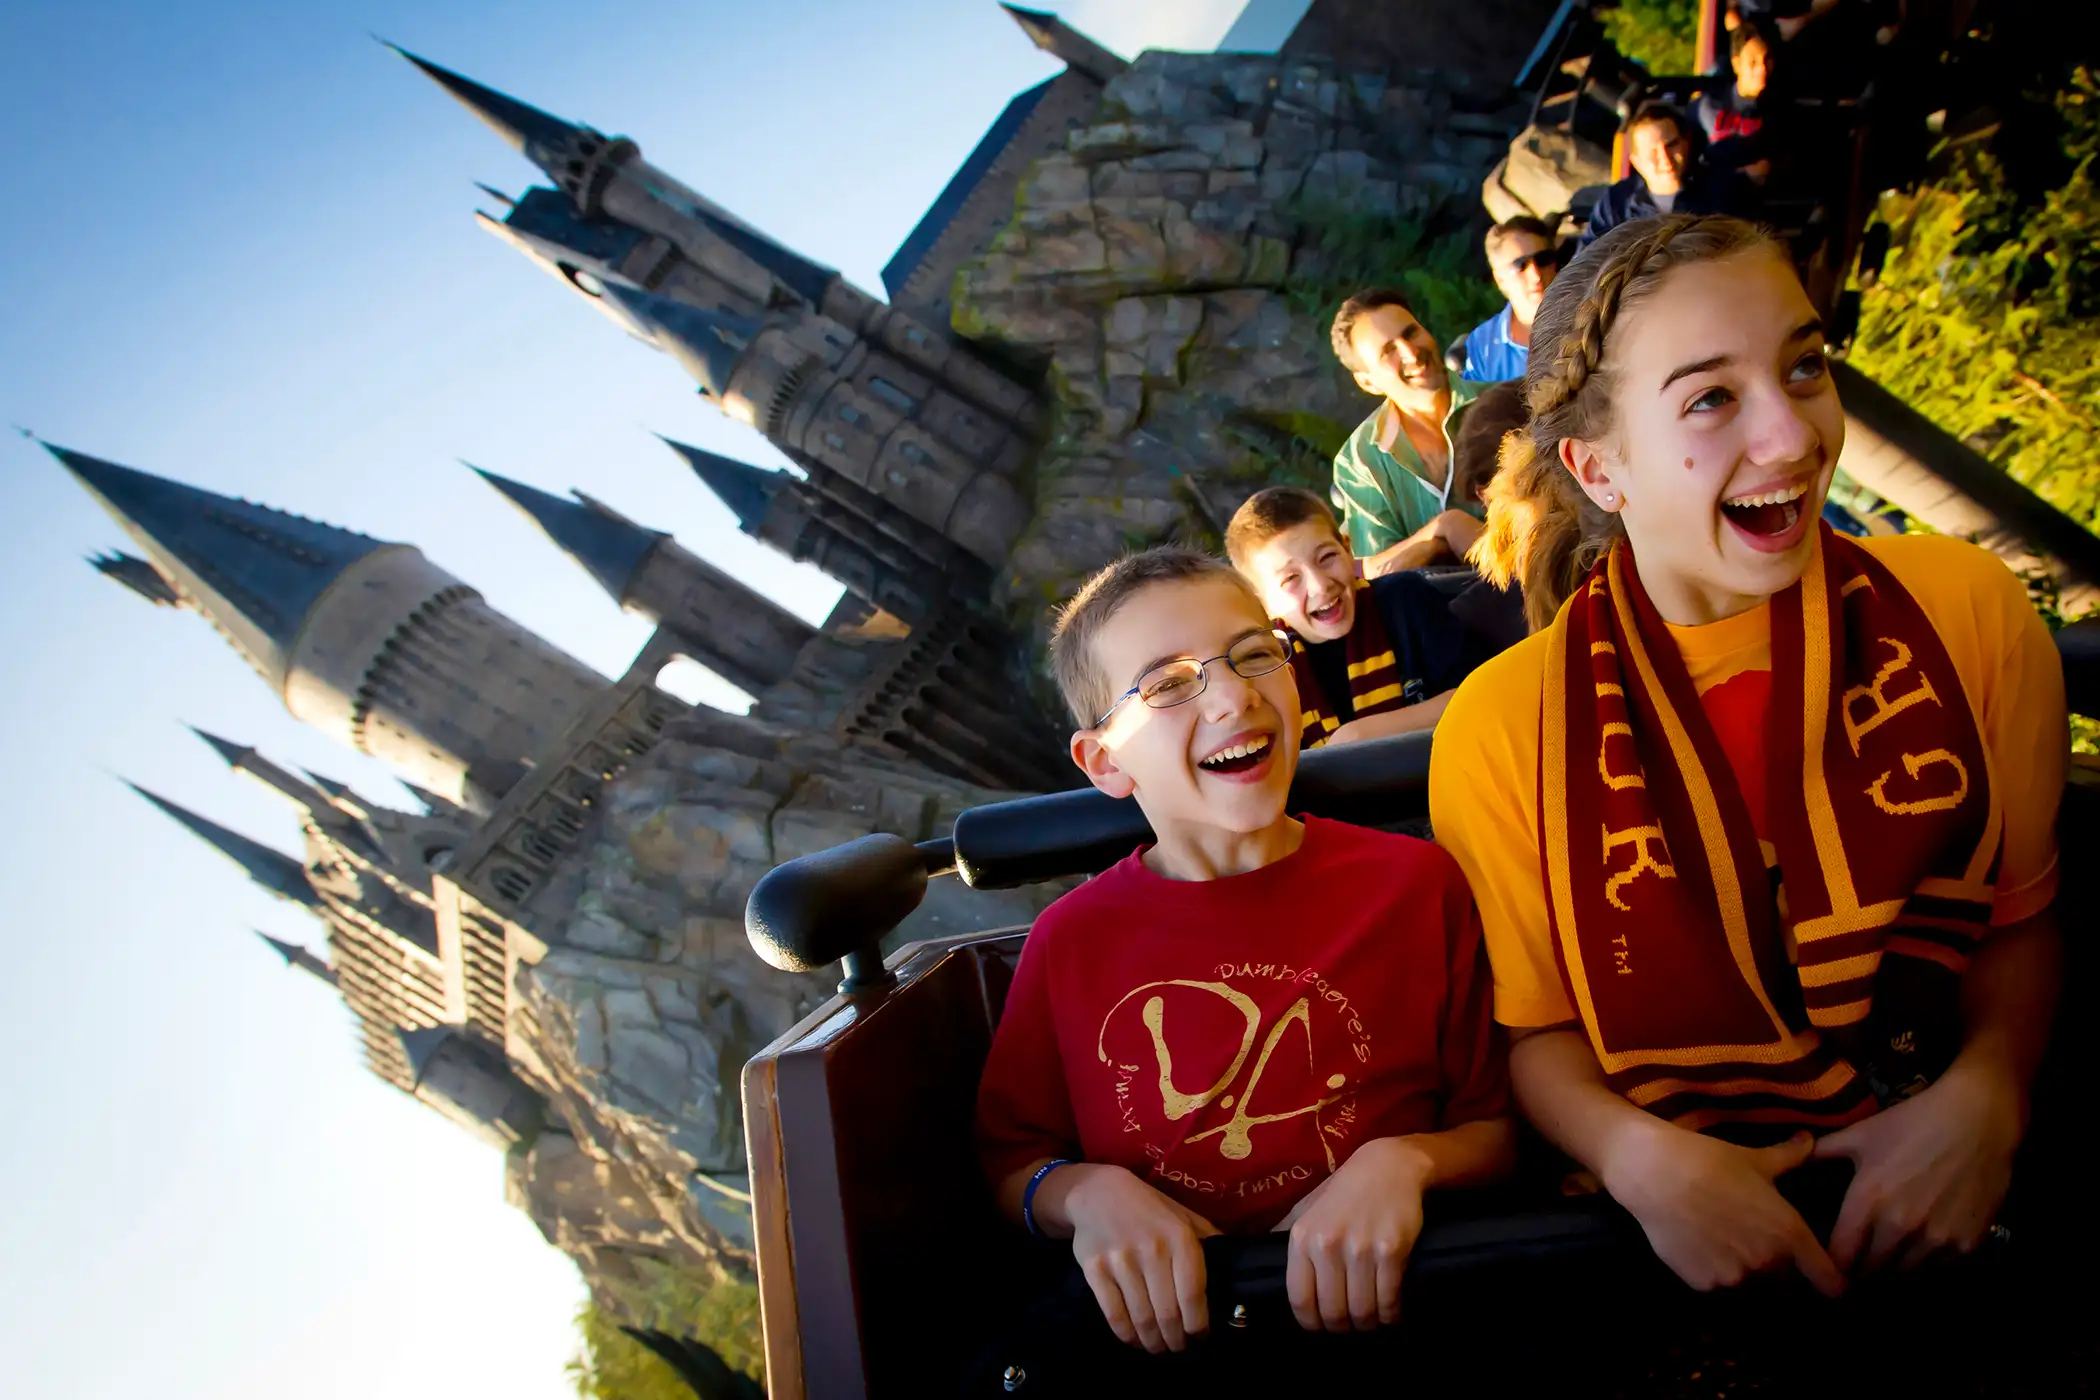 On Flight of the Hippogriff at The Wizarding World of Harry Potter